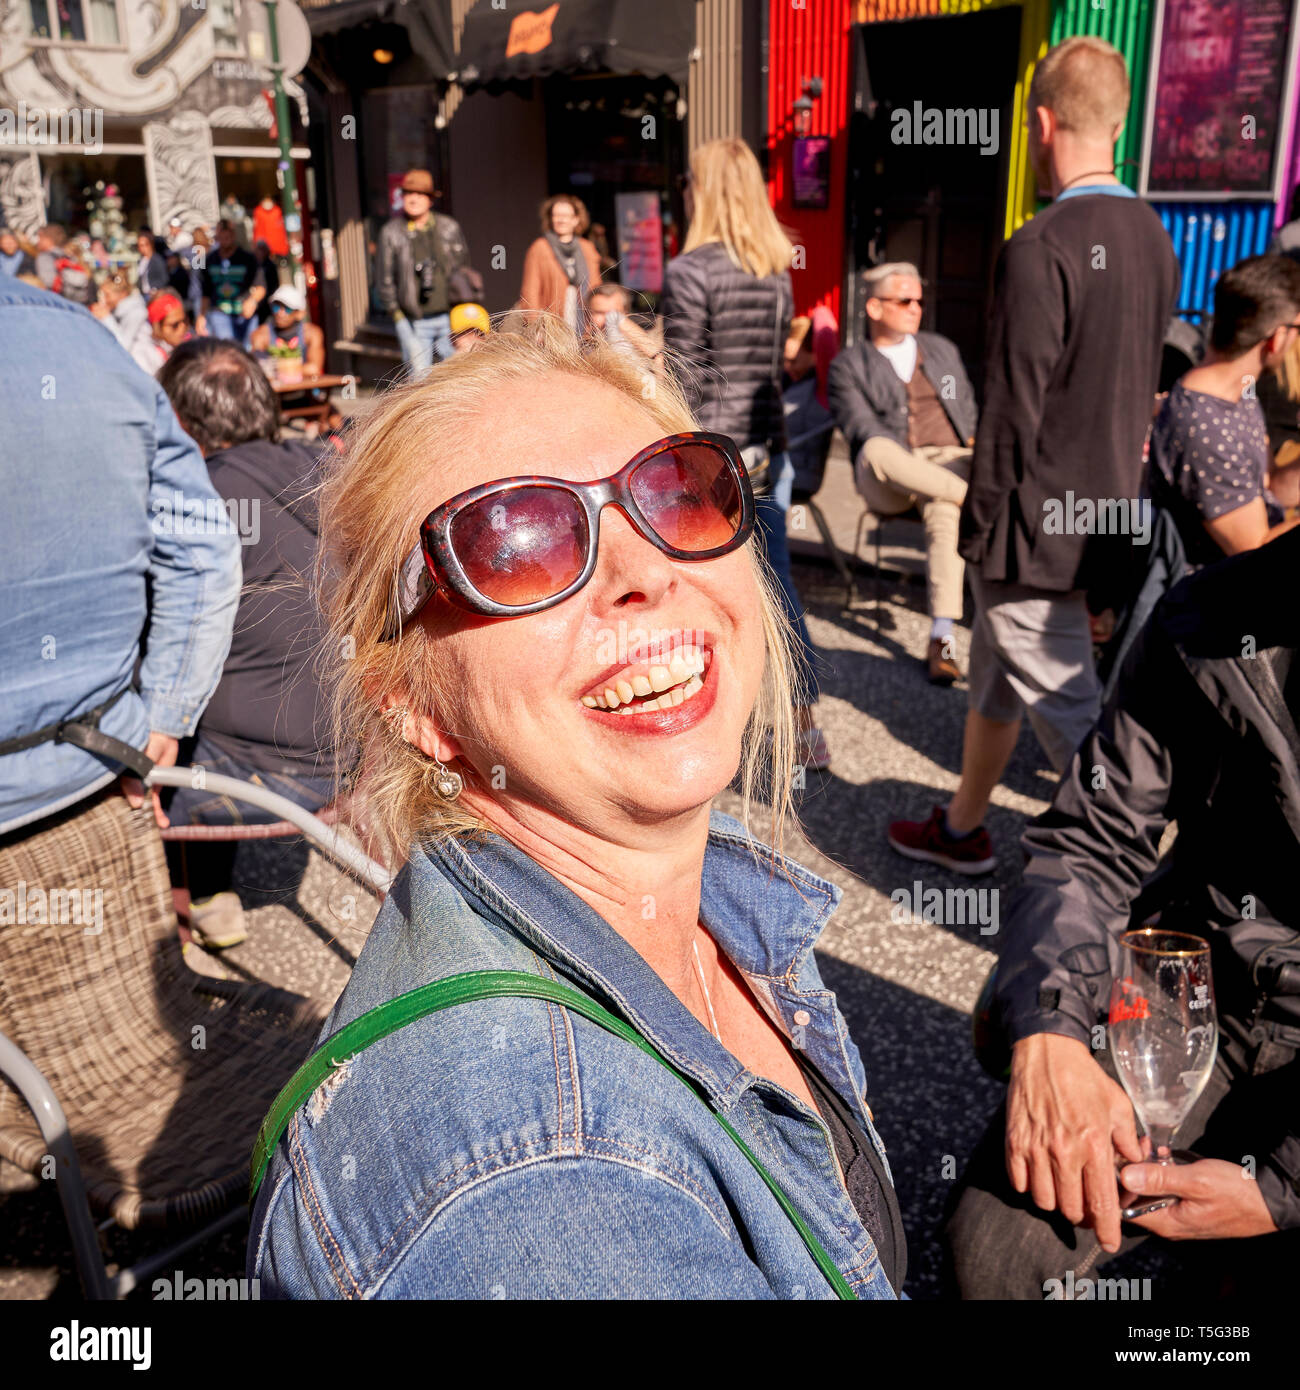 Happy woman, Cultural Day, Summer Festival, Reykjavik, Iceland Stock Photo